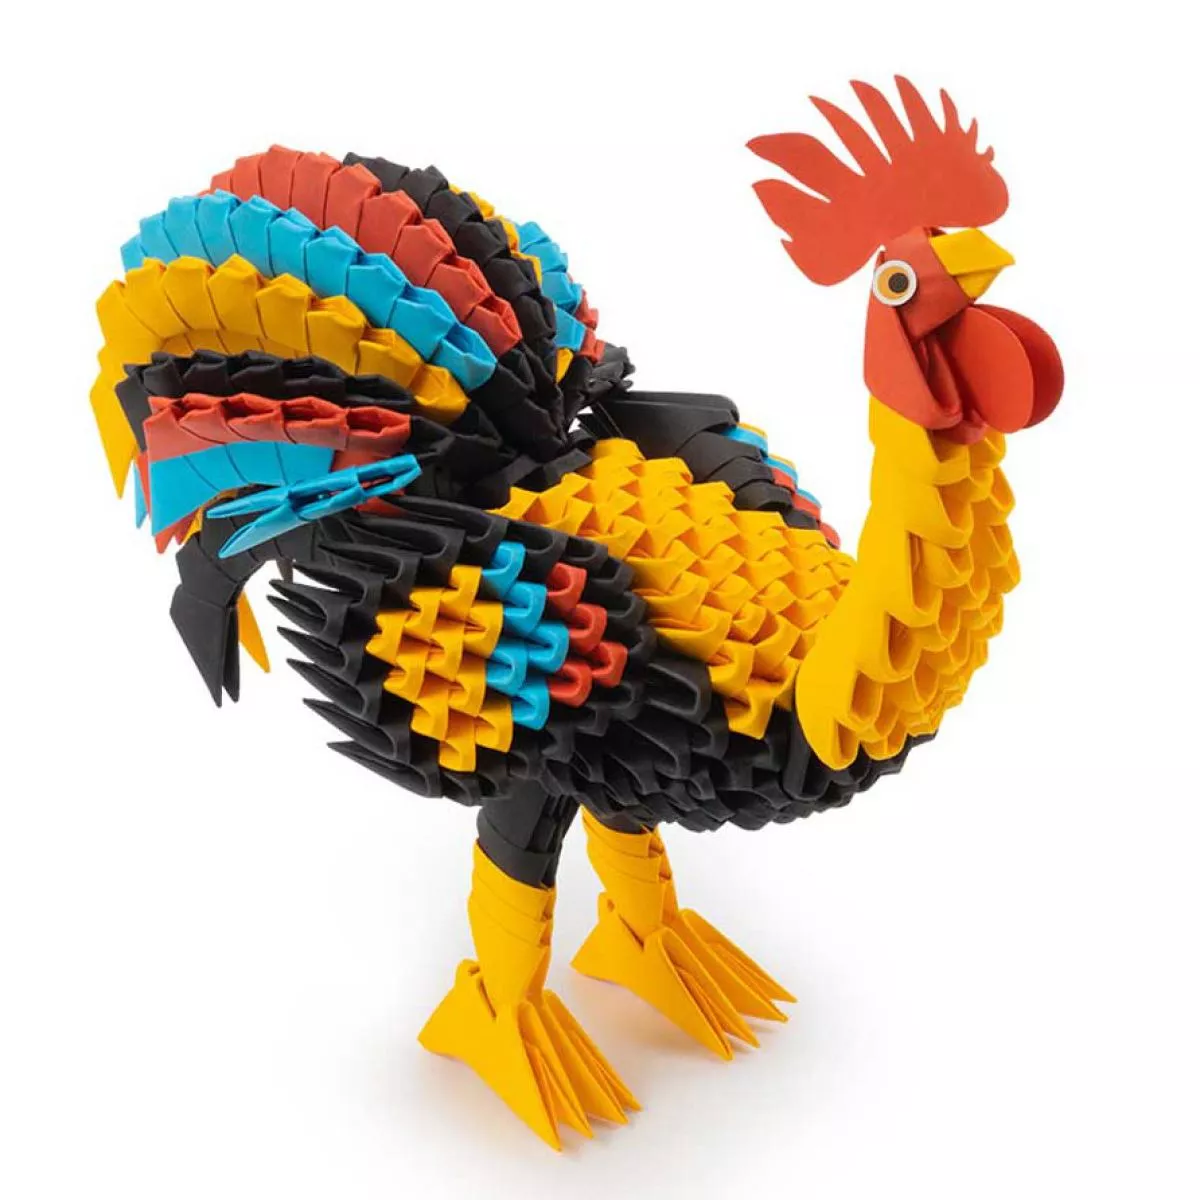 Origami 3D Folding Puzzle "Rooster" made of Paper